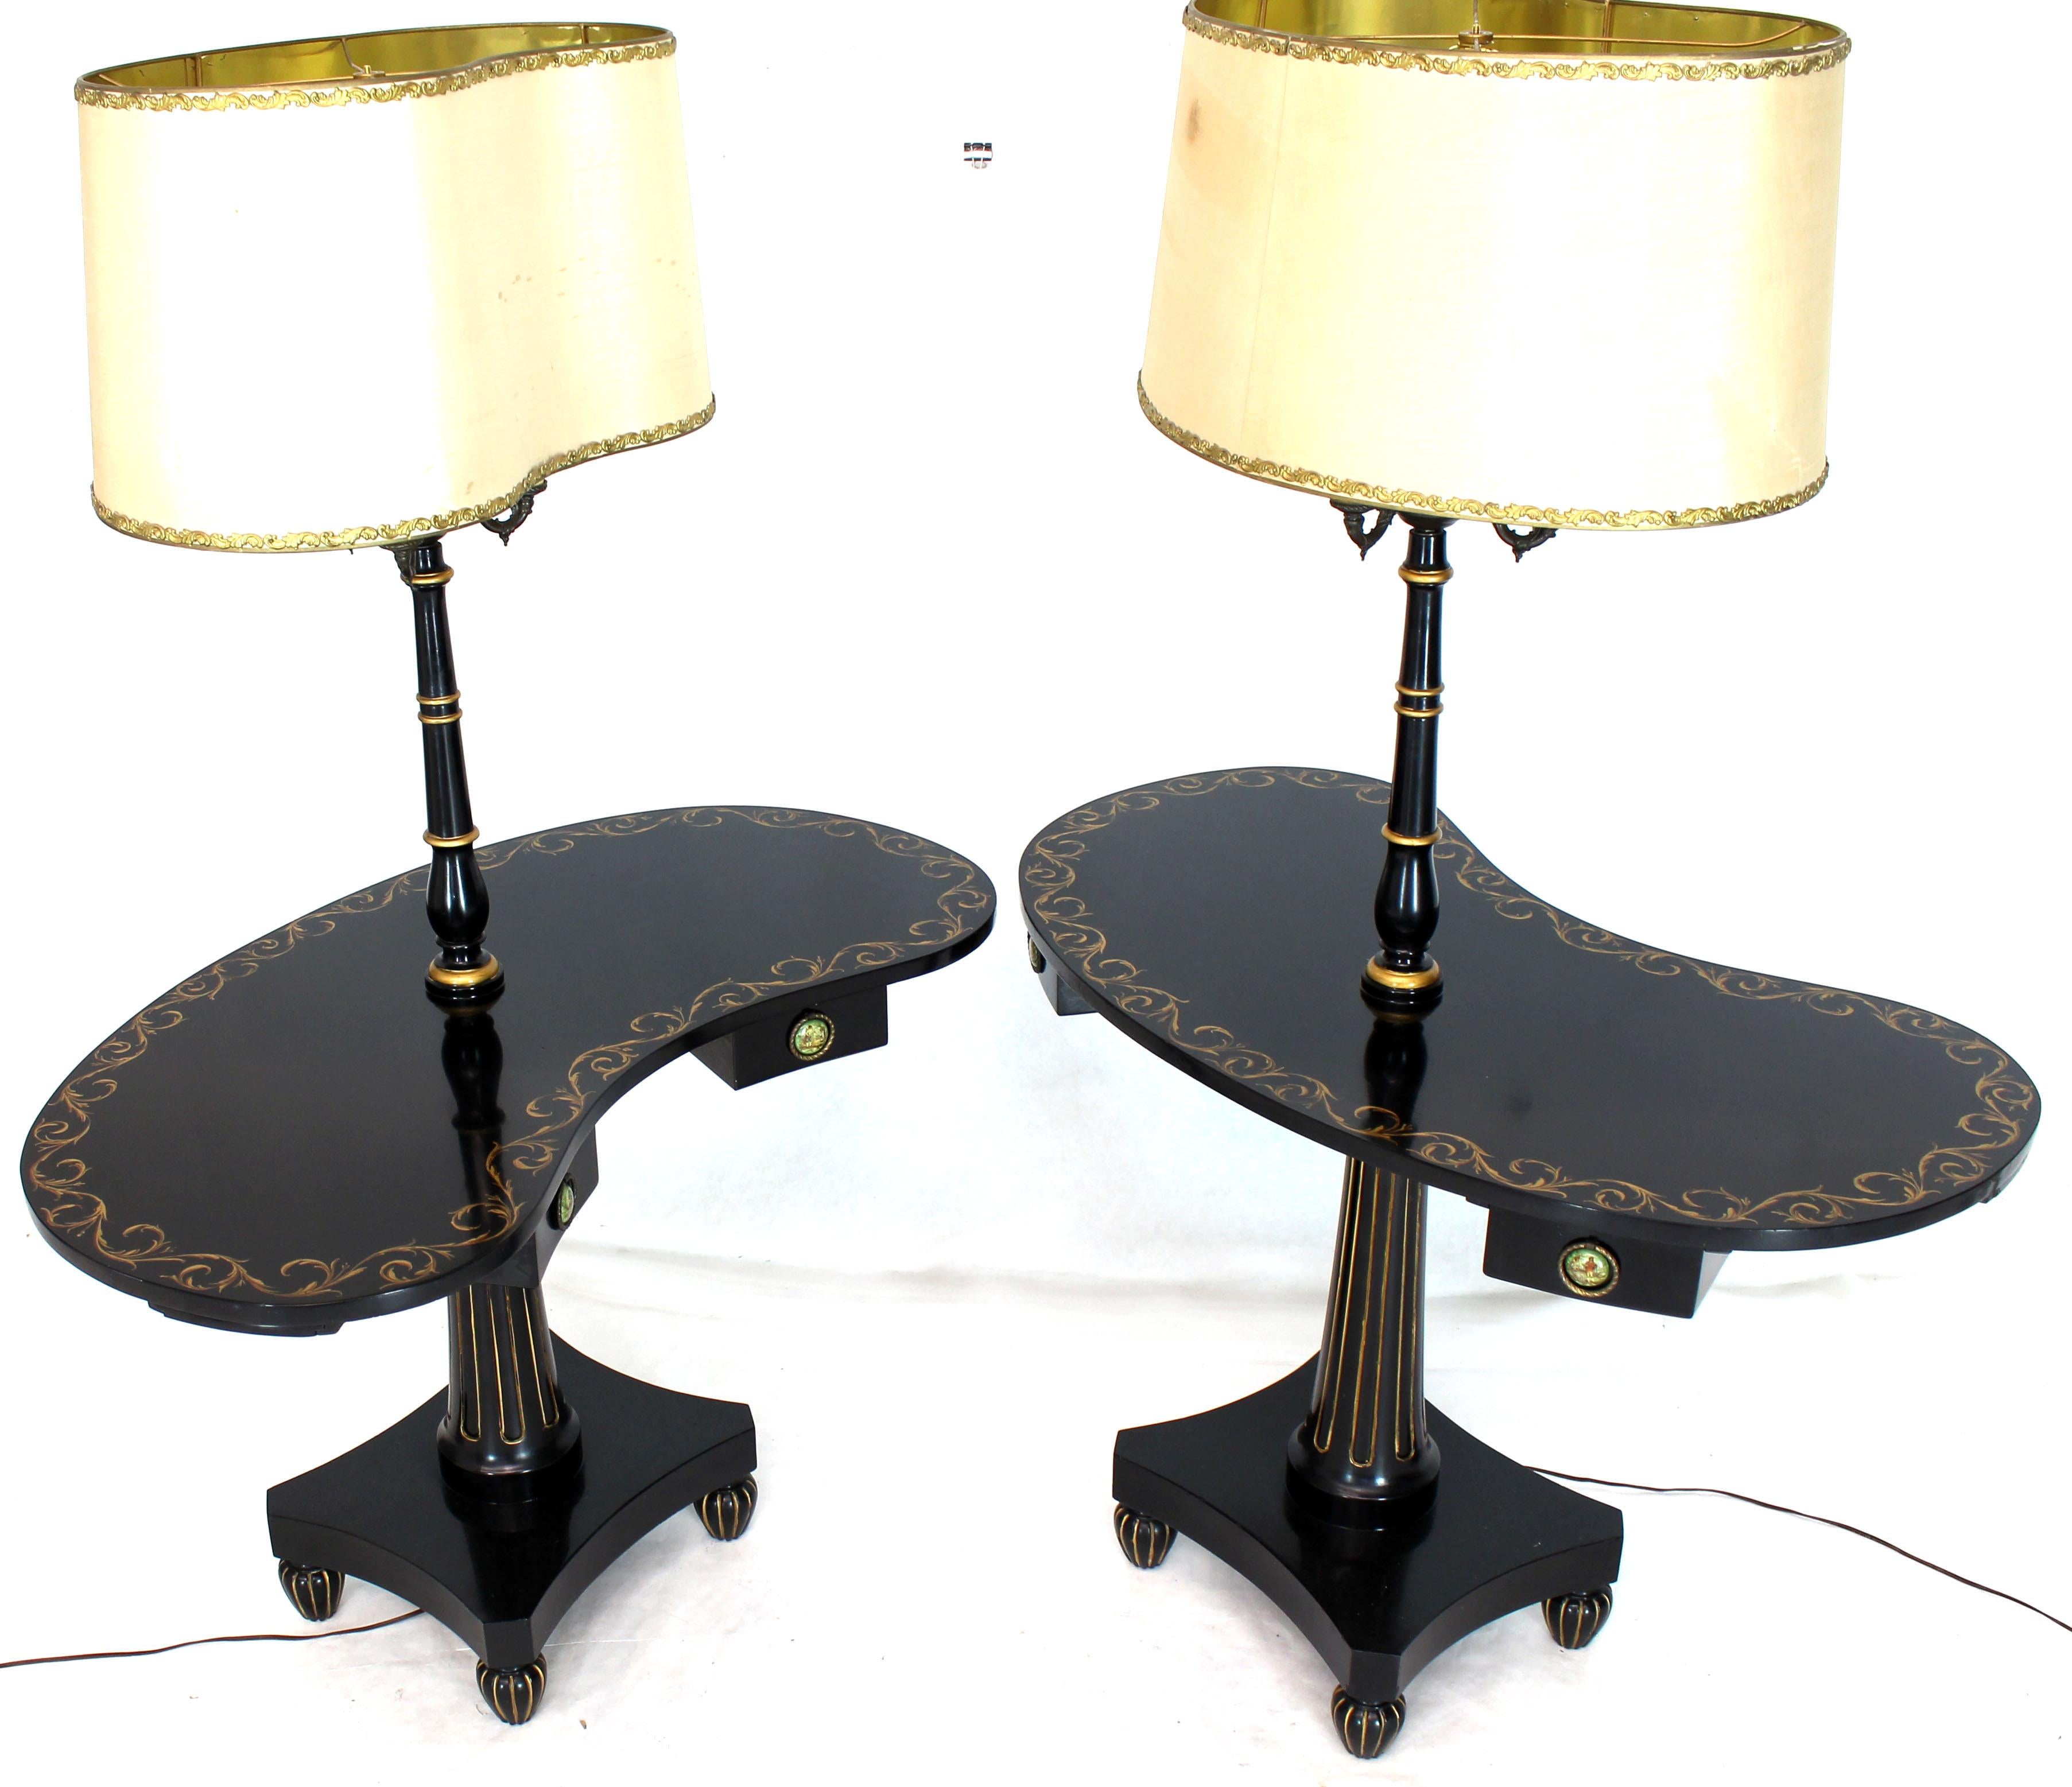 Turned and tapered bases black lacquer and gold decorated Art Deco style, circa 1940s kidney shape occasional tables floor lamps. Adams style gold decoration.